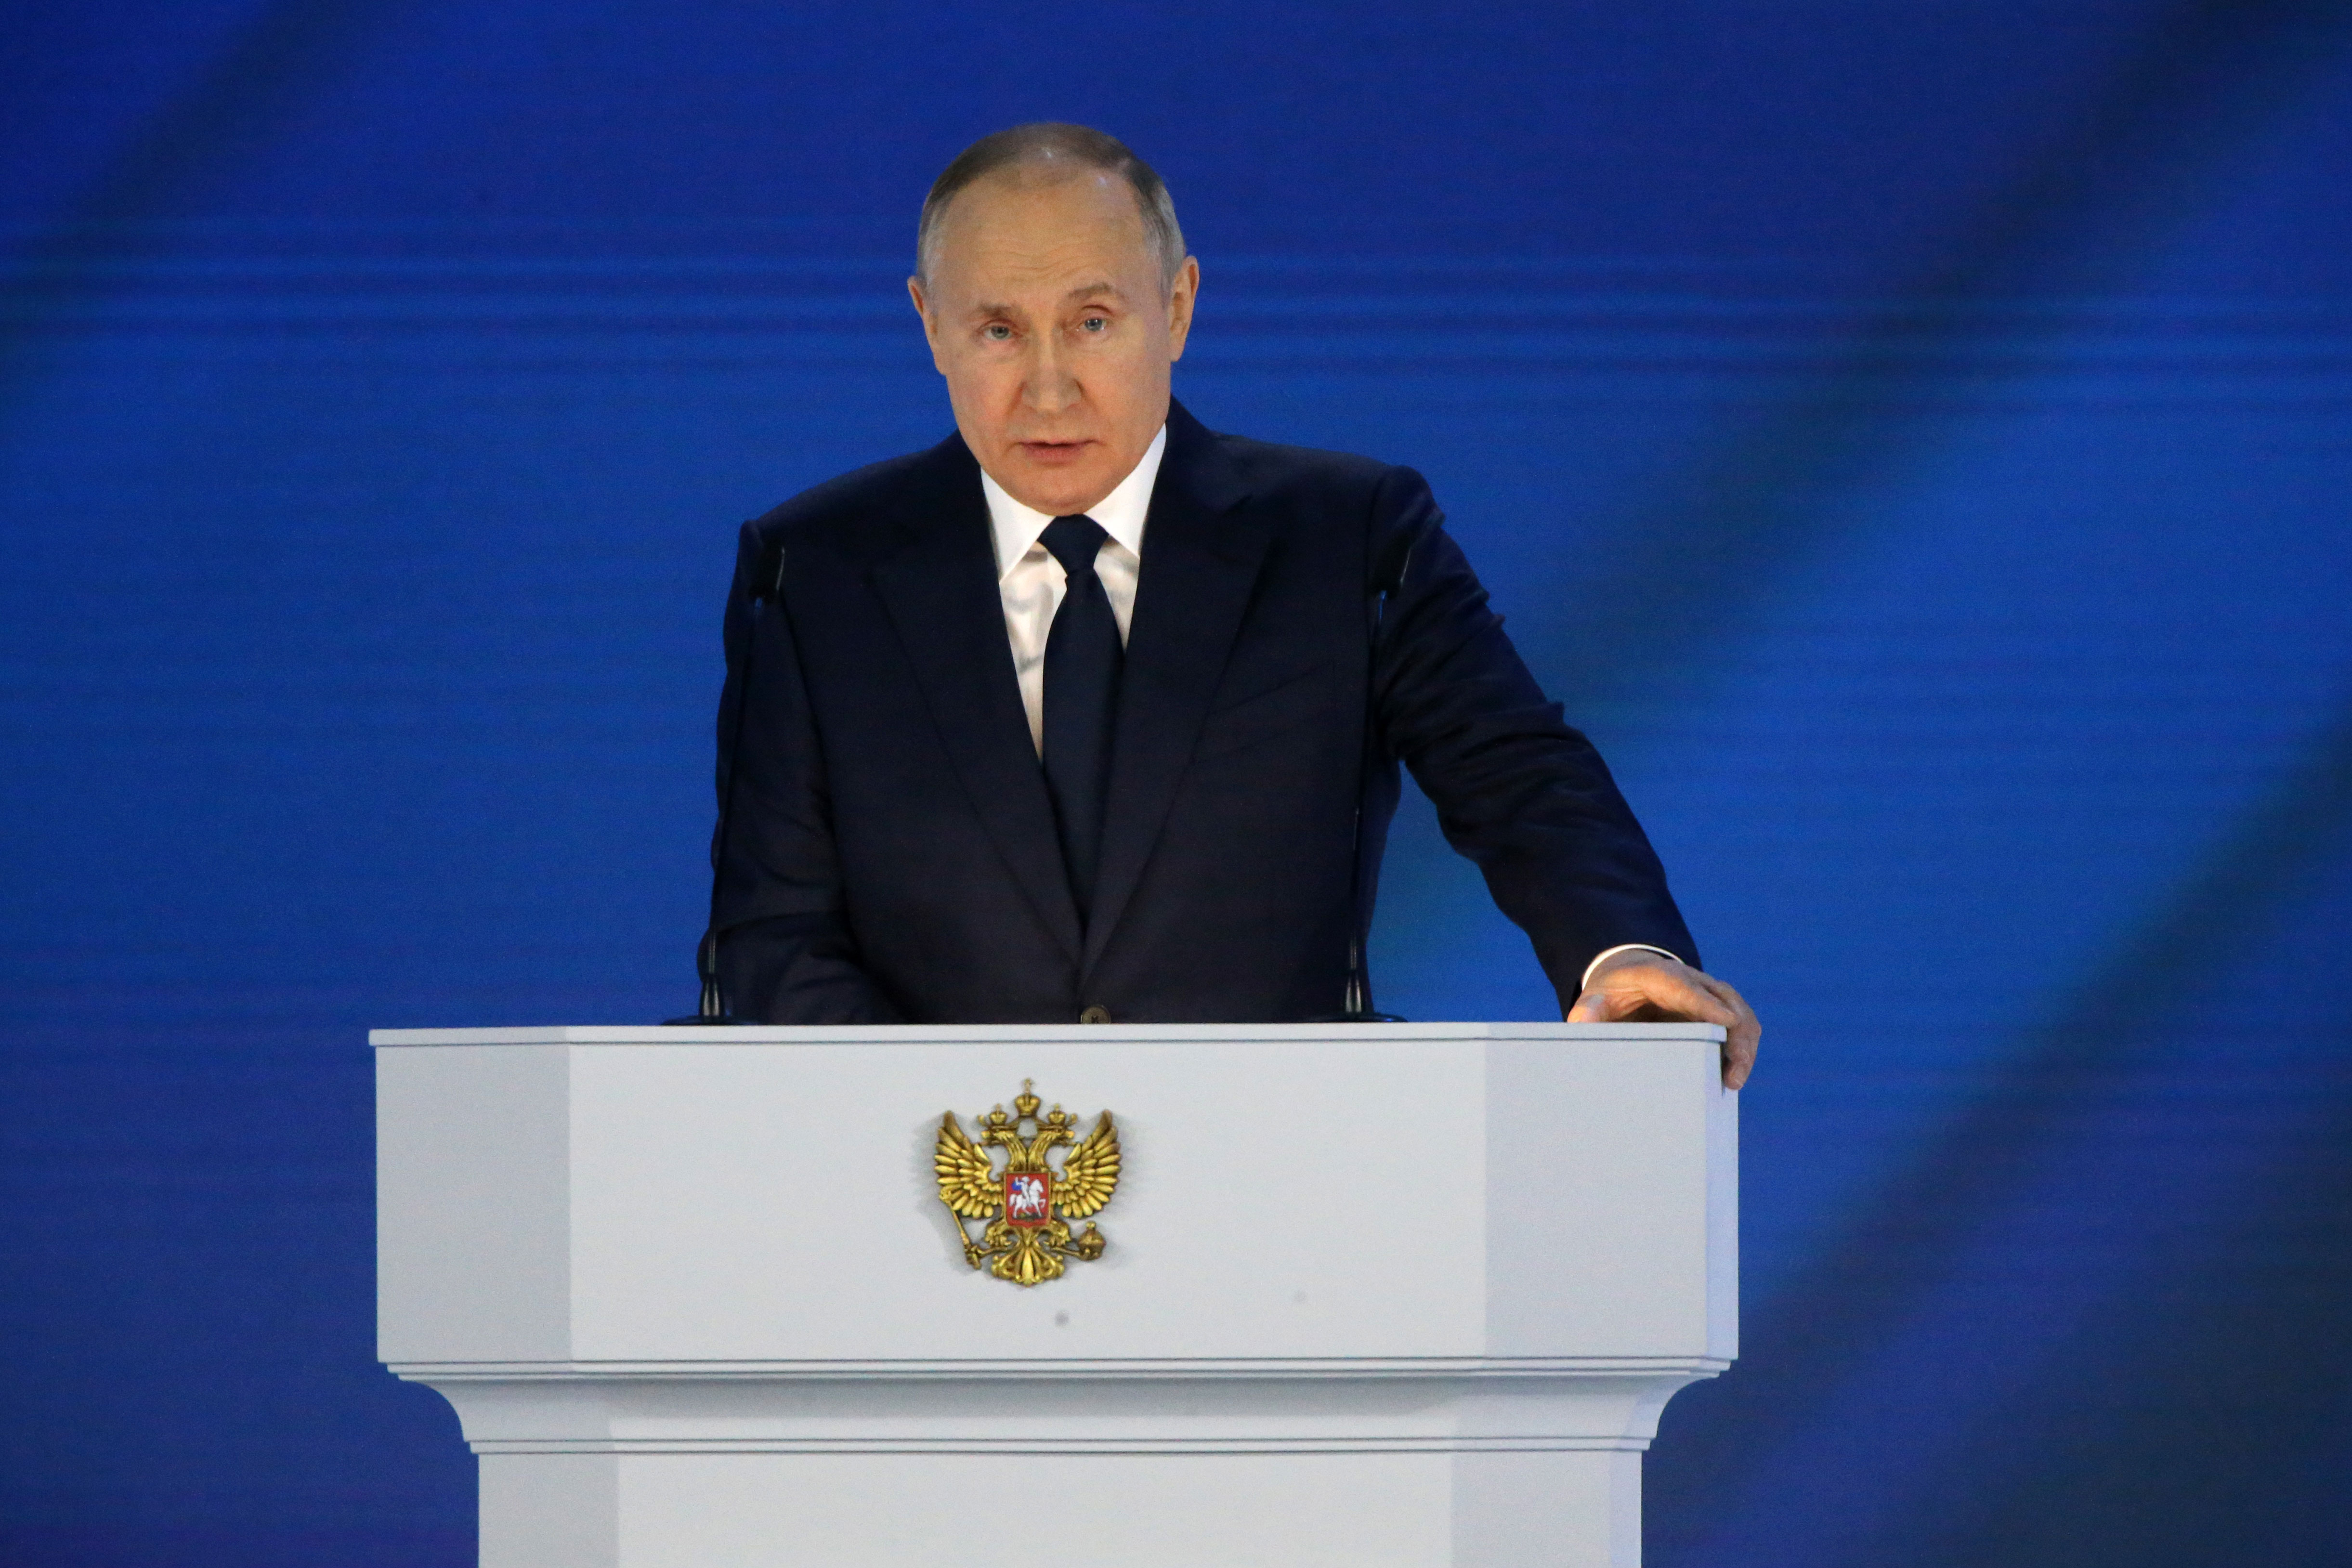 Russian President Vladimir Putin delivers his annual address on April 21 in Moscow.